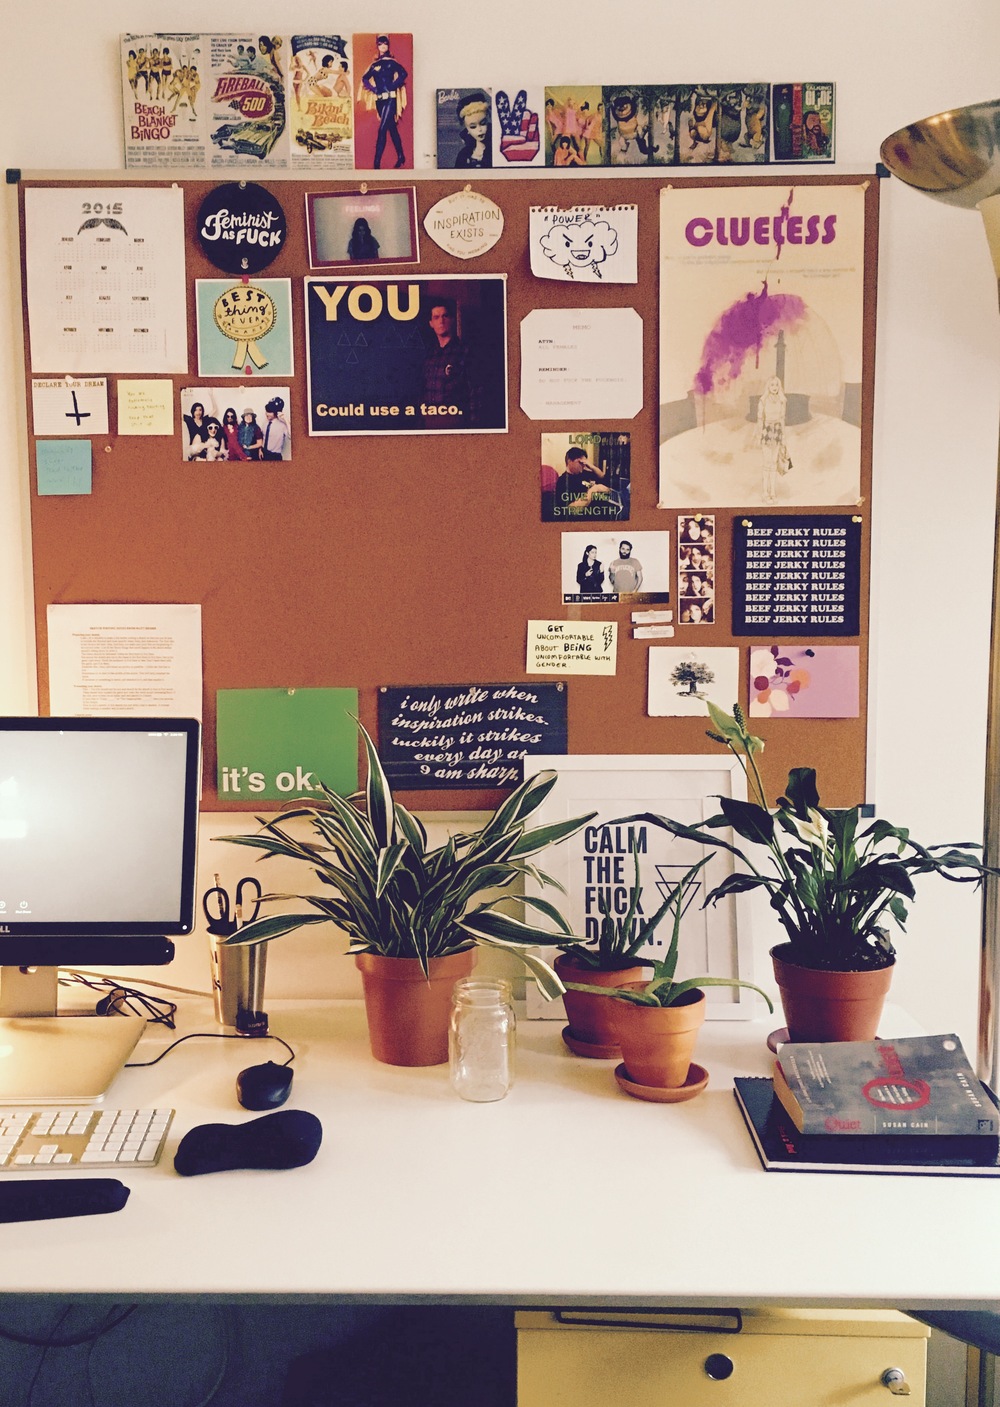 Show us a photo of your workspace